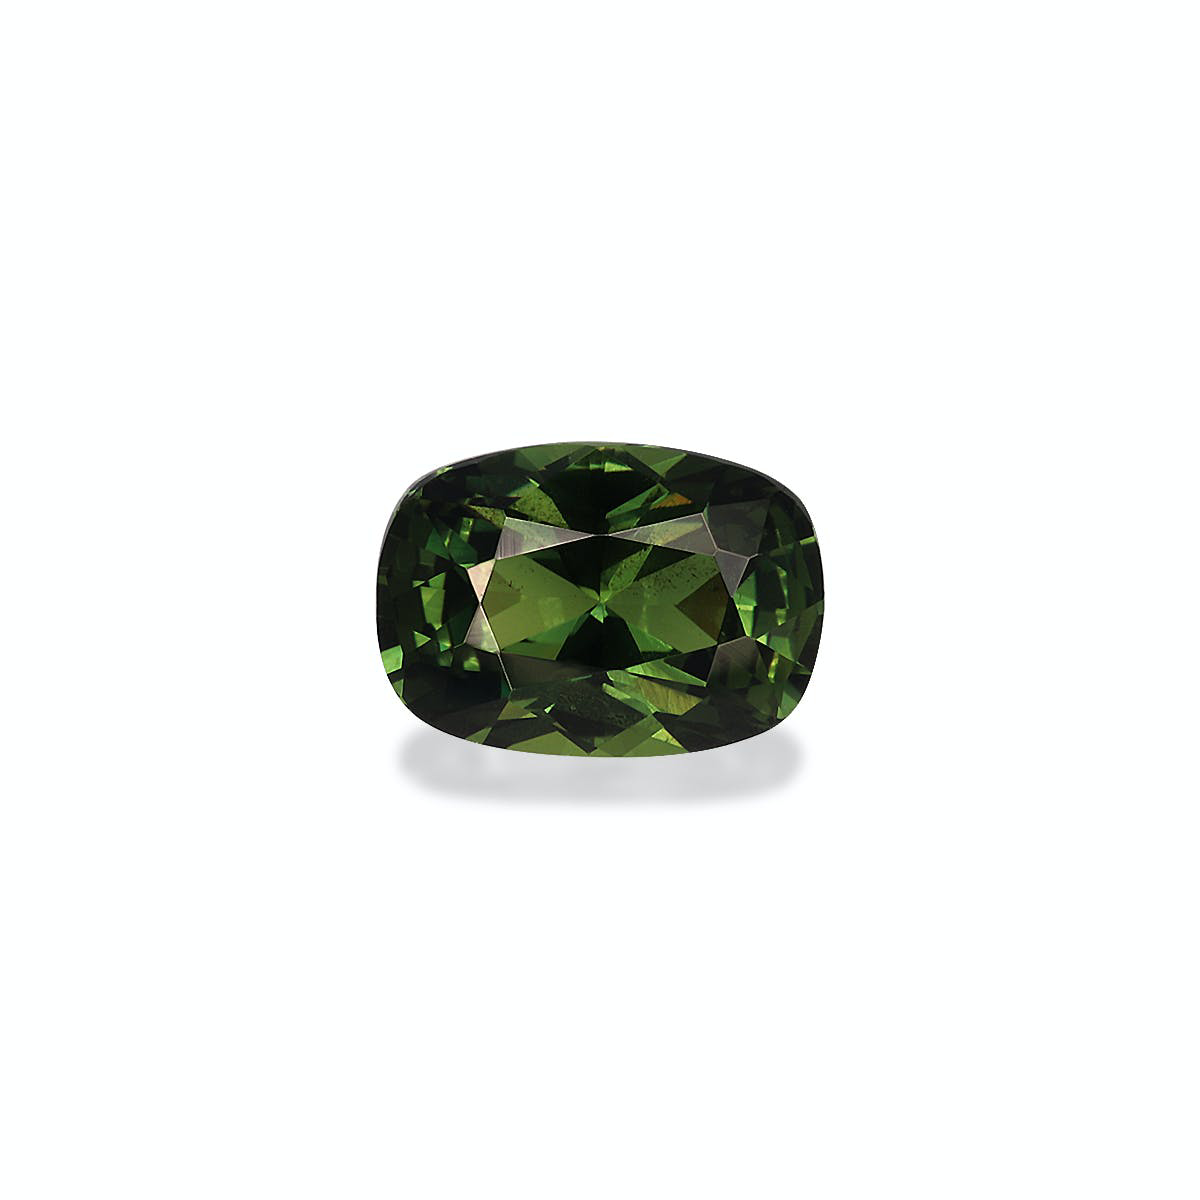 Picture of Green Teal Sapphire 1.54ct (TL0111)